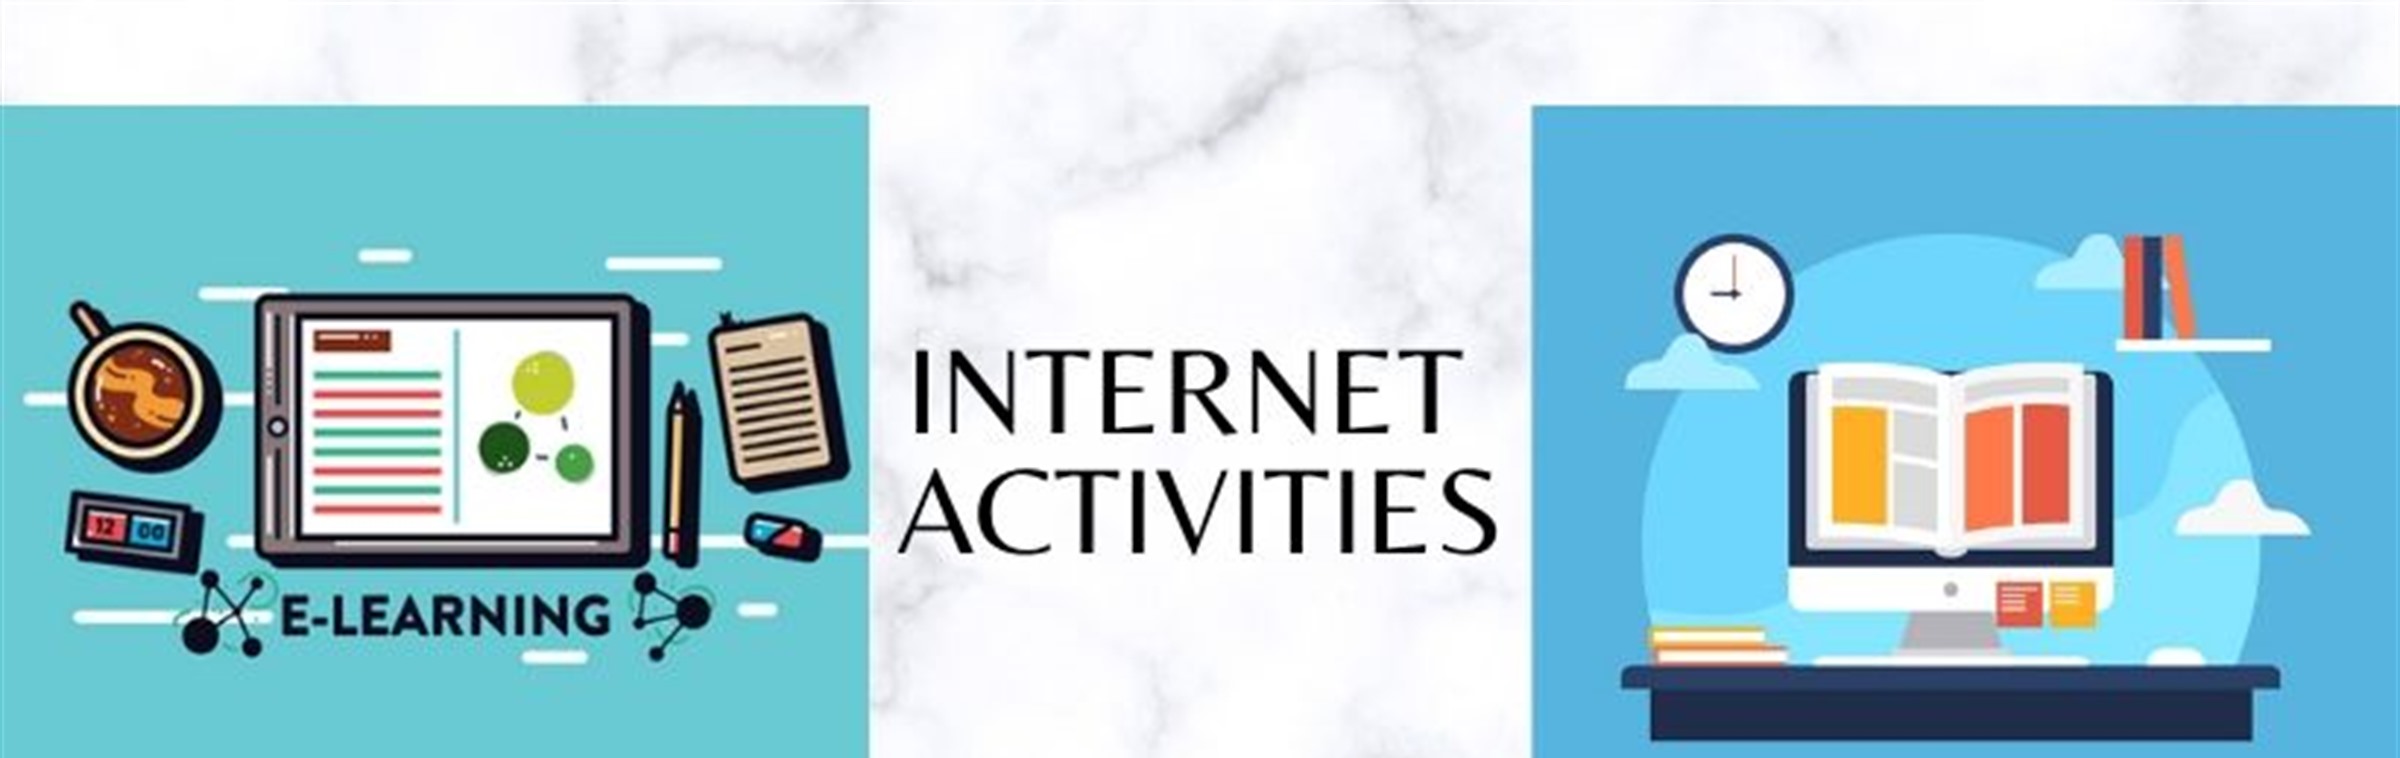 internet activity meaning